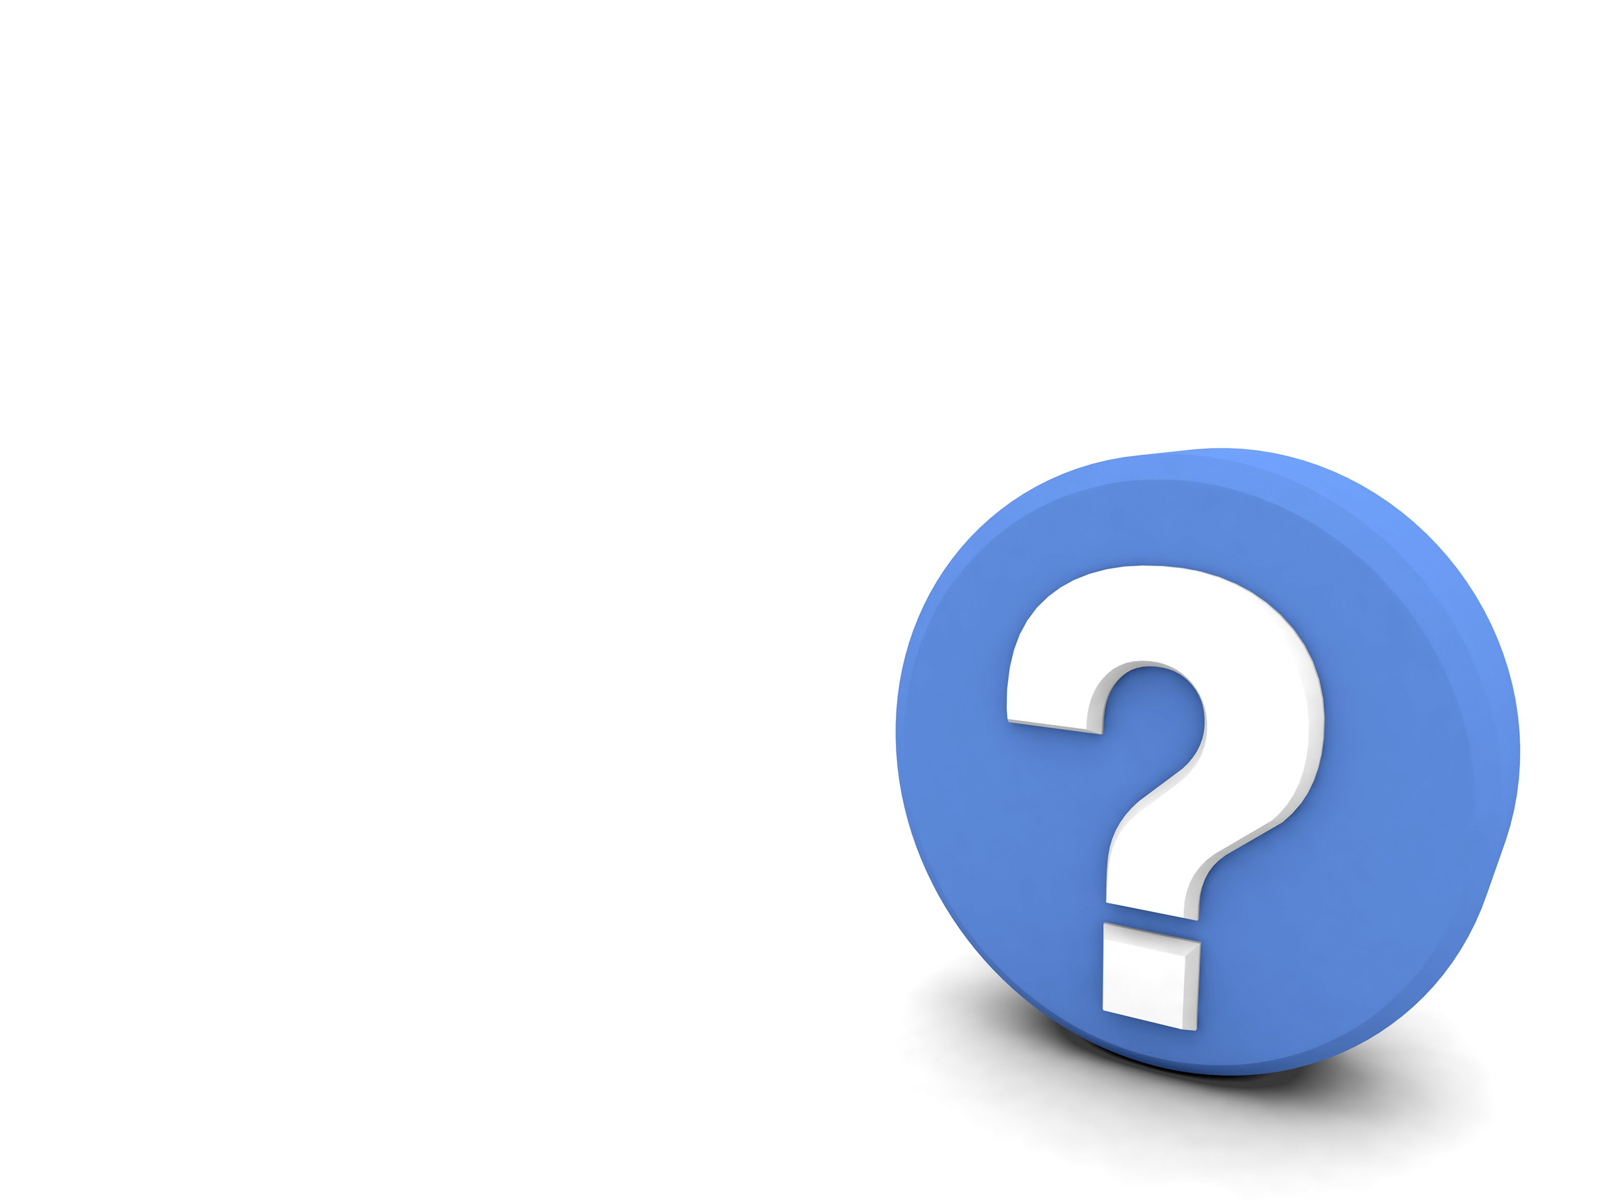 Big Question Mark Powerpoint Design - Powerpoint Templates and ...